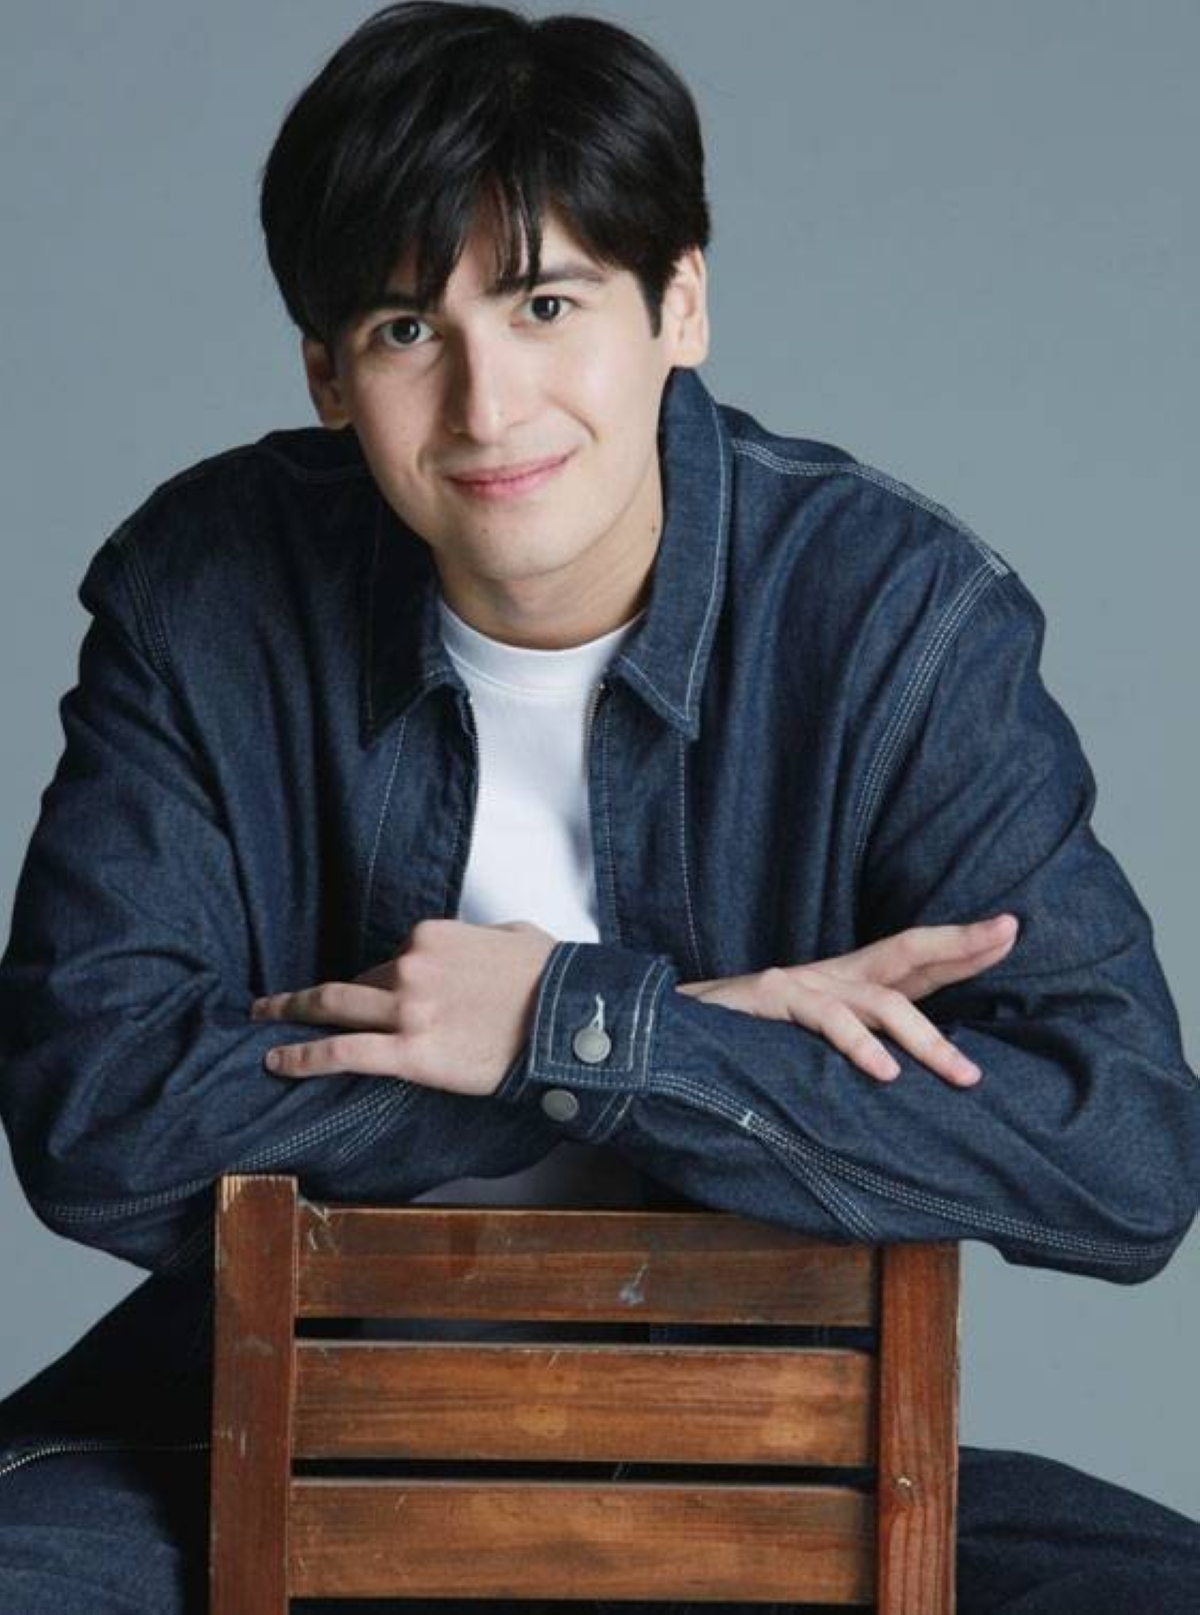 This early in showbiz, Andres Muhlach has been given a fitting title: Prince of Hearts. FACEBOOK PHOTO/OFFICIALANDRESMUHLACH